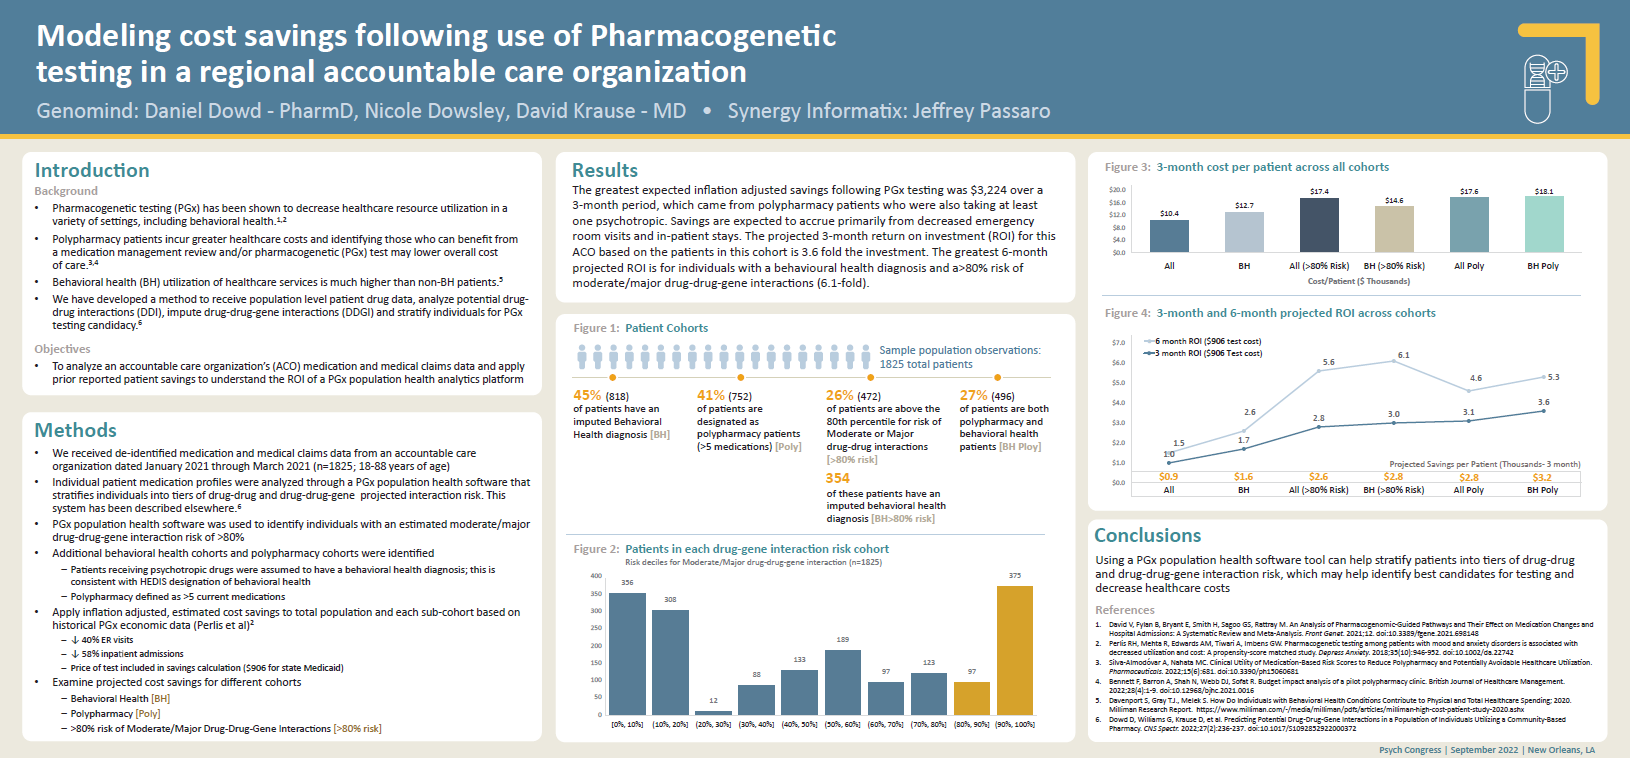 Genomind poster for Psych Congress 2022: Modeling cost savings following use of pharmacogenetic testing in a regional accountable care organization